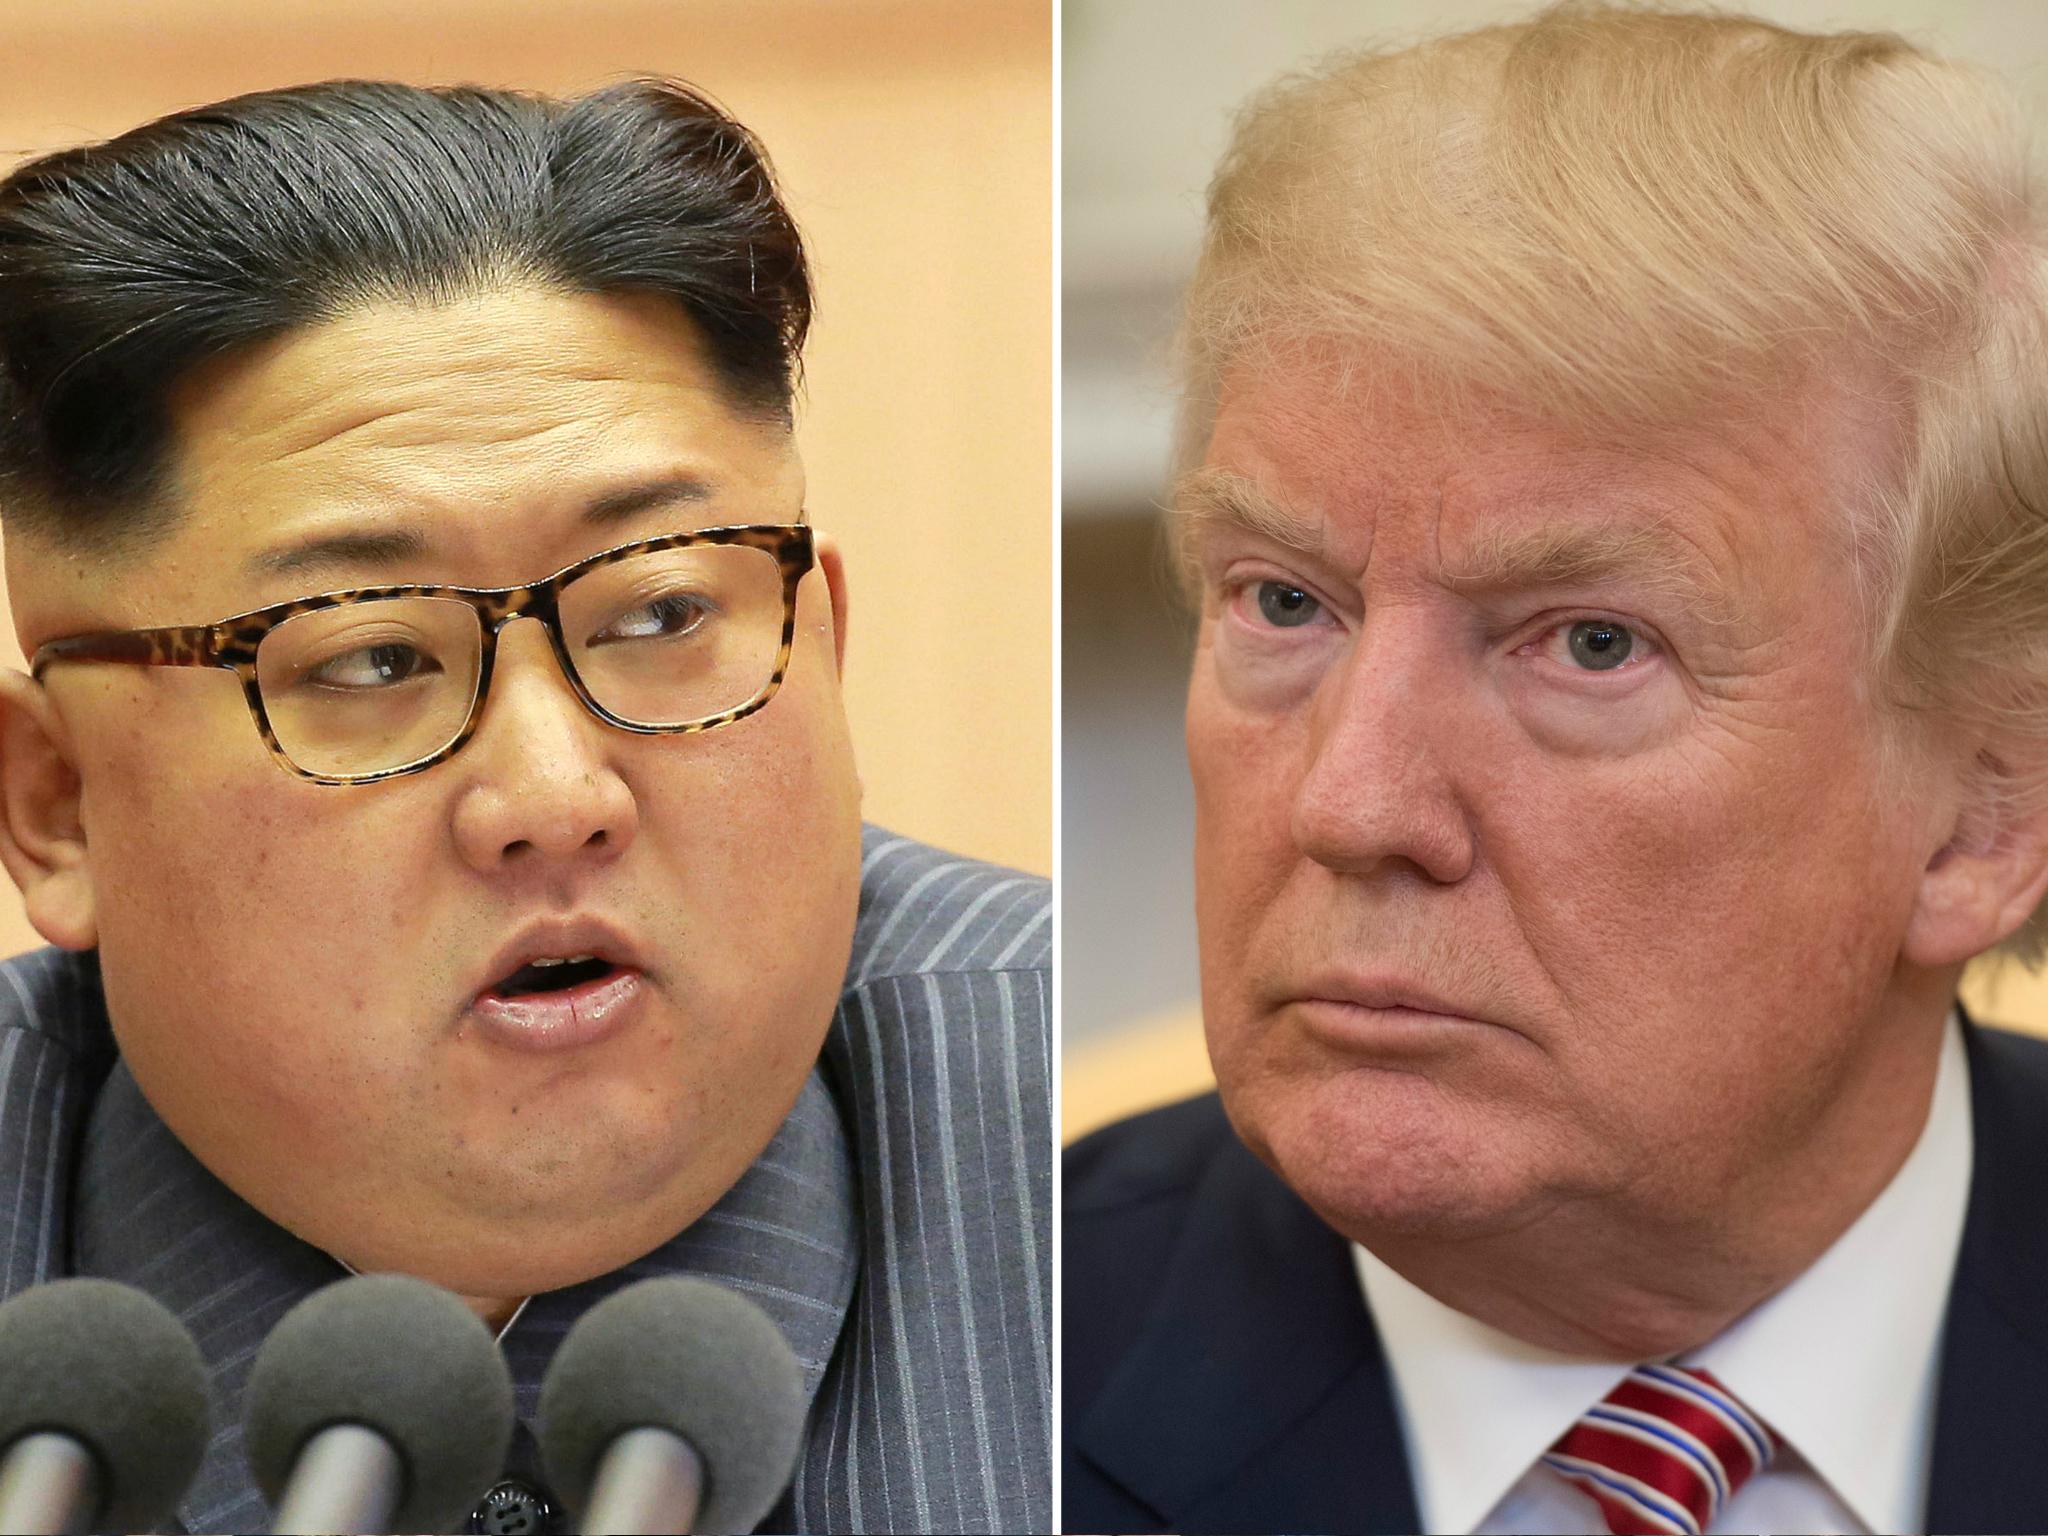 North Korean Leader Kim Jong-un extended an invitation to meet for talks to US President Donald Trump, who says the meeting will take place before May 2018.